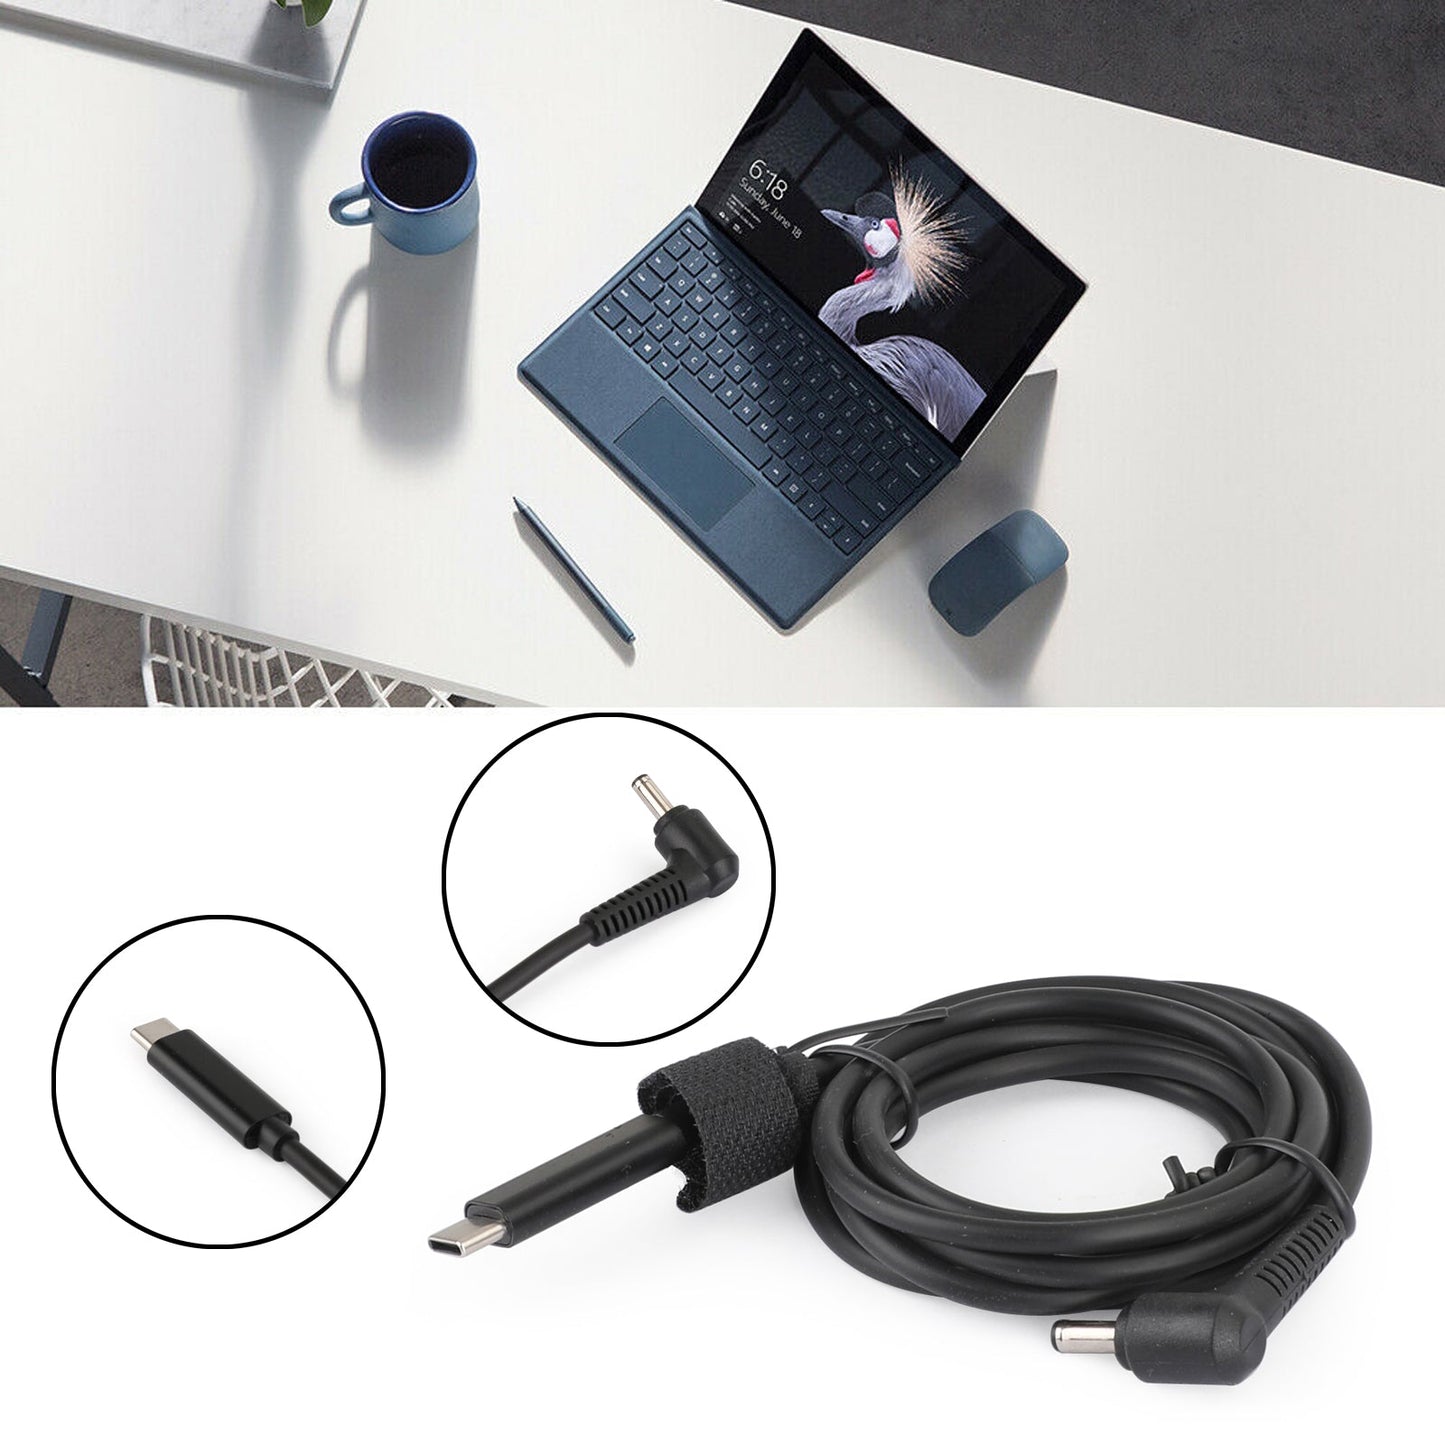 1.5m Type-C PD USB Charger Cable 4.0*1.35mm Fit for ASUS Zenbook Vivobook